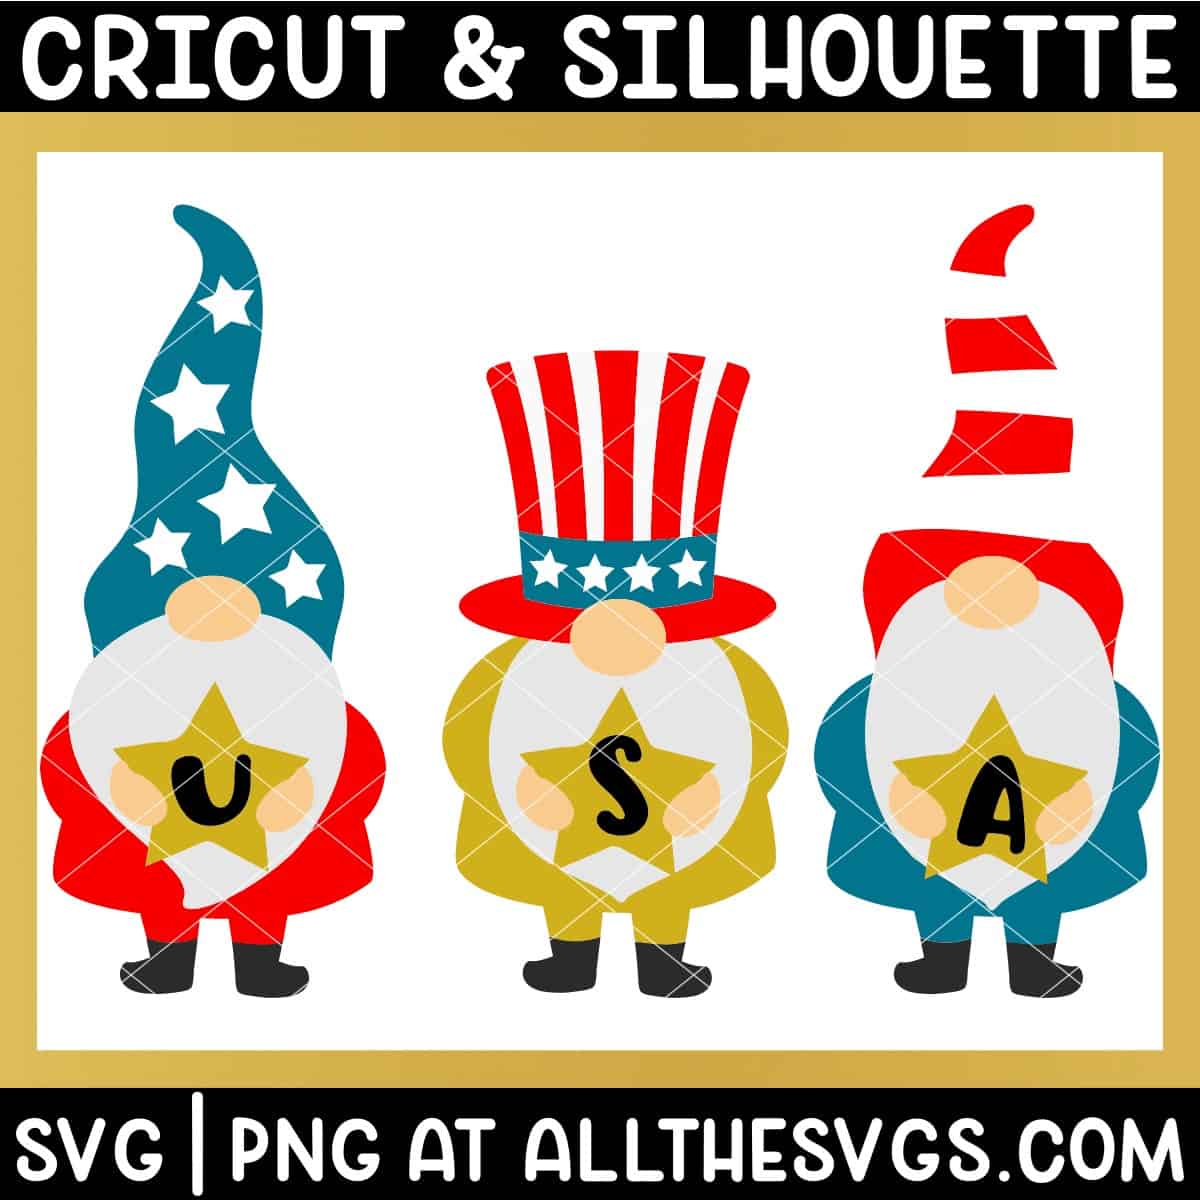 july 4 gnome svg file with stars spelling out U.S.A.